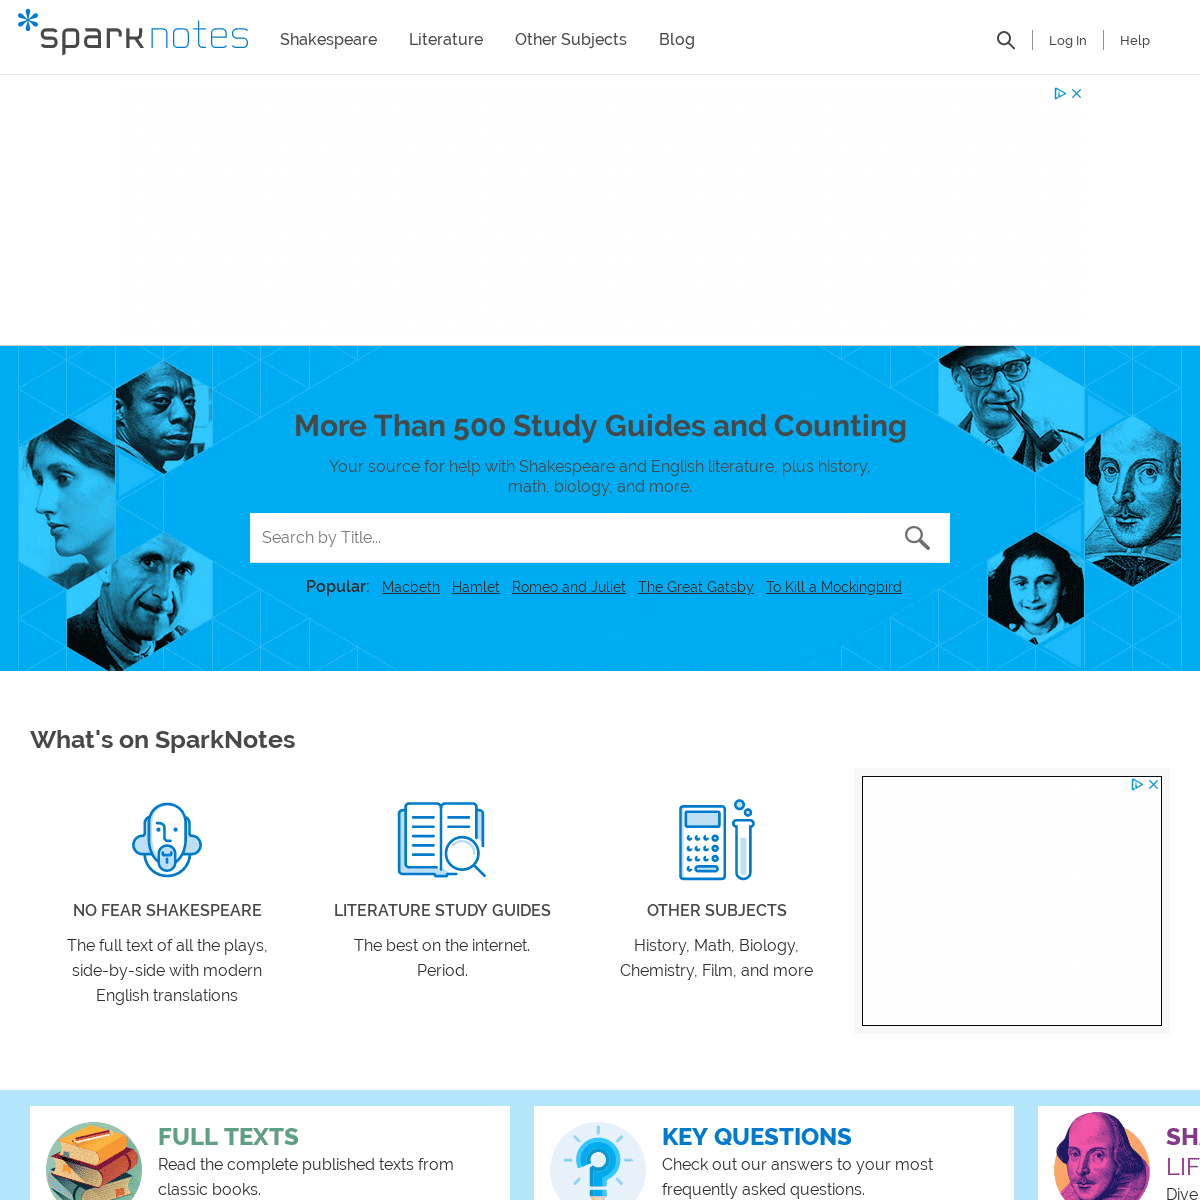 A complete backup of sparknotes.com